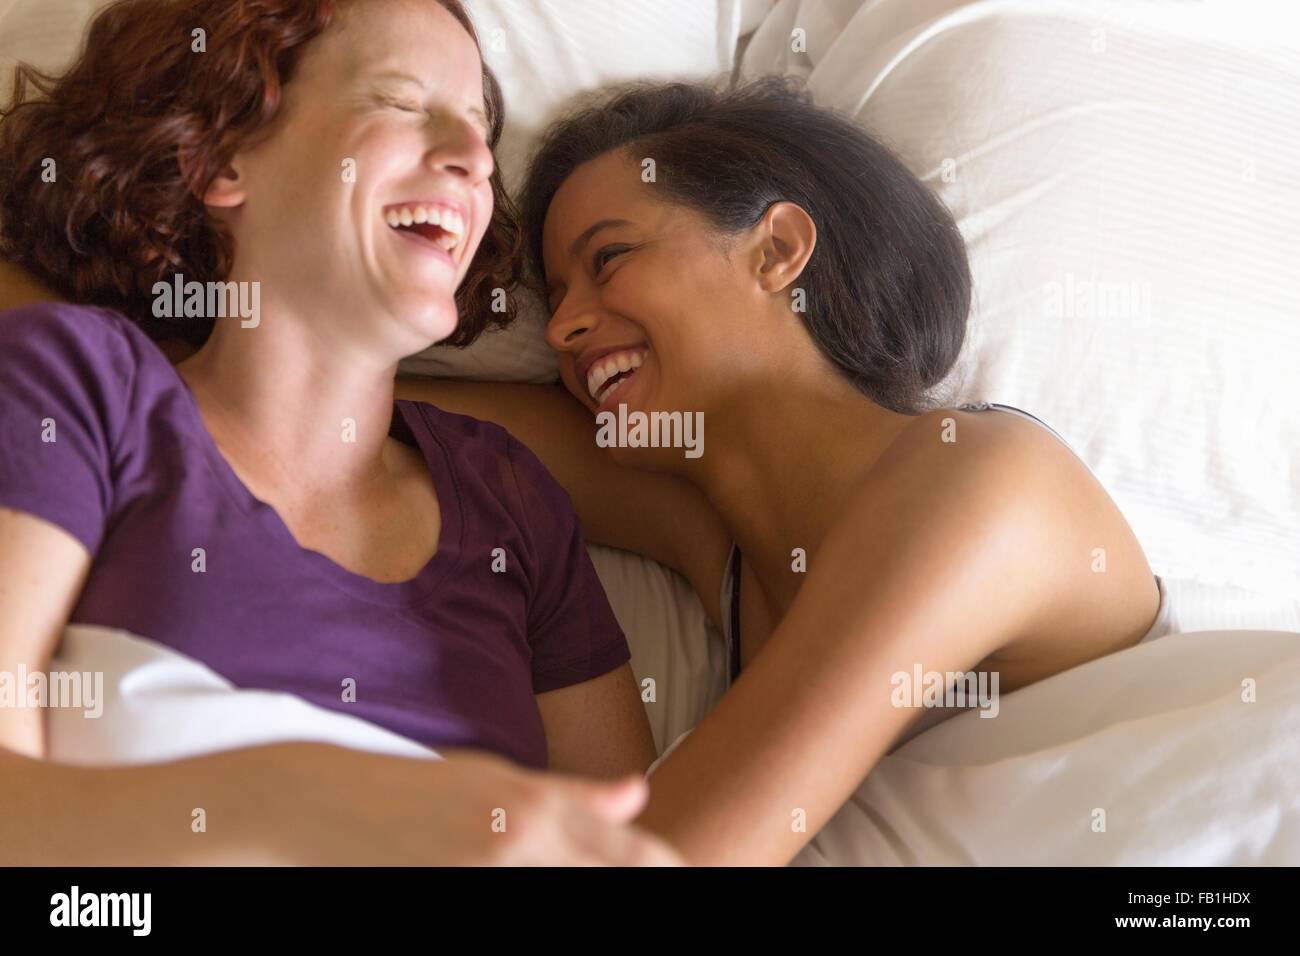 High angle view of lesbian couple lying in bed hugging, laughing Stock Photo